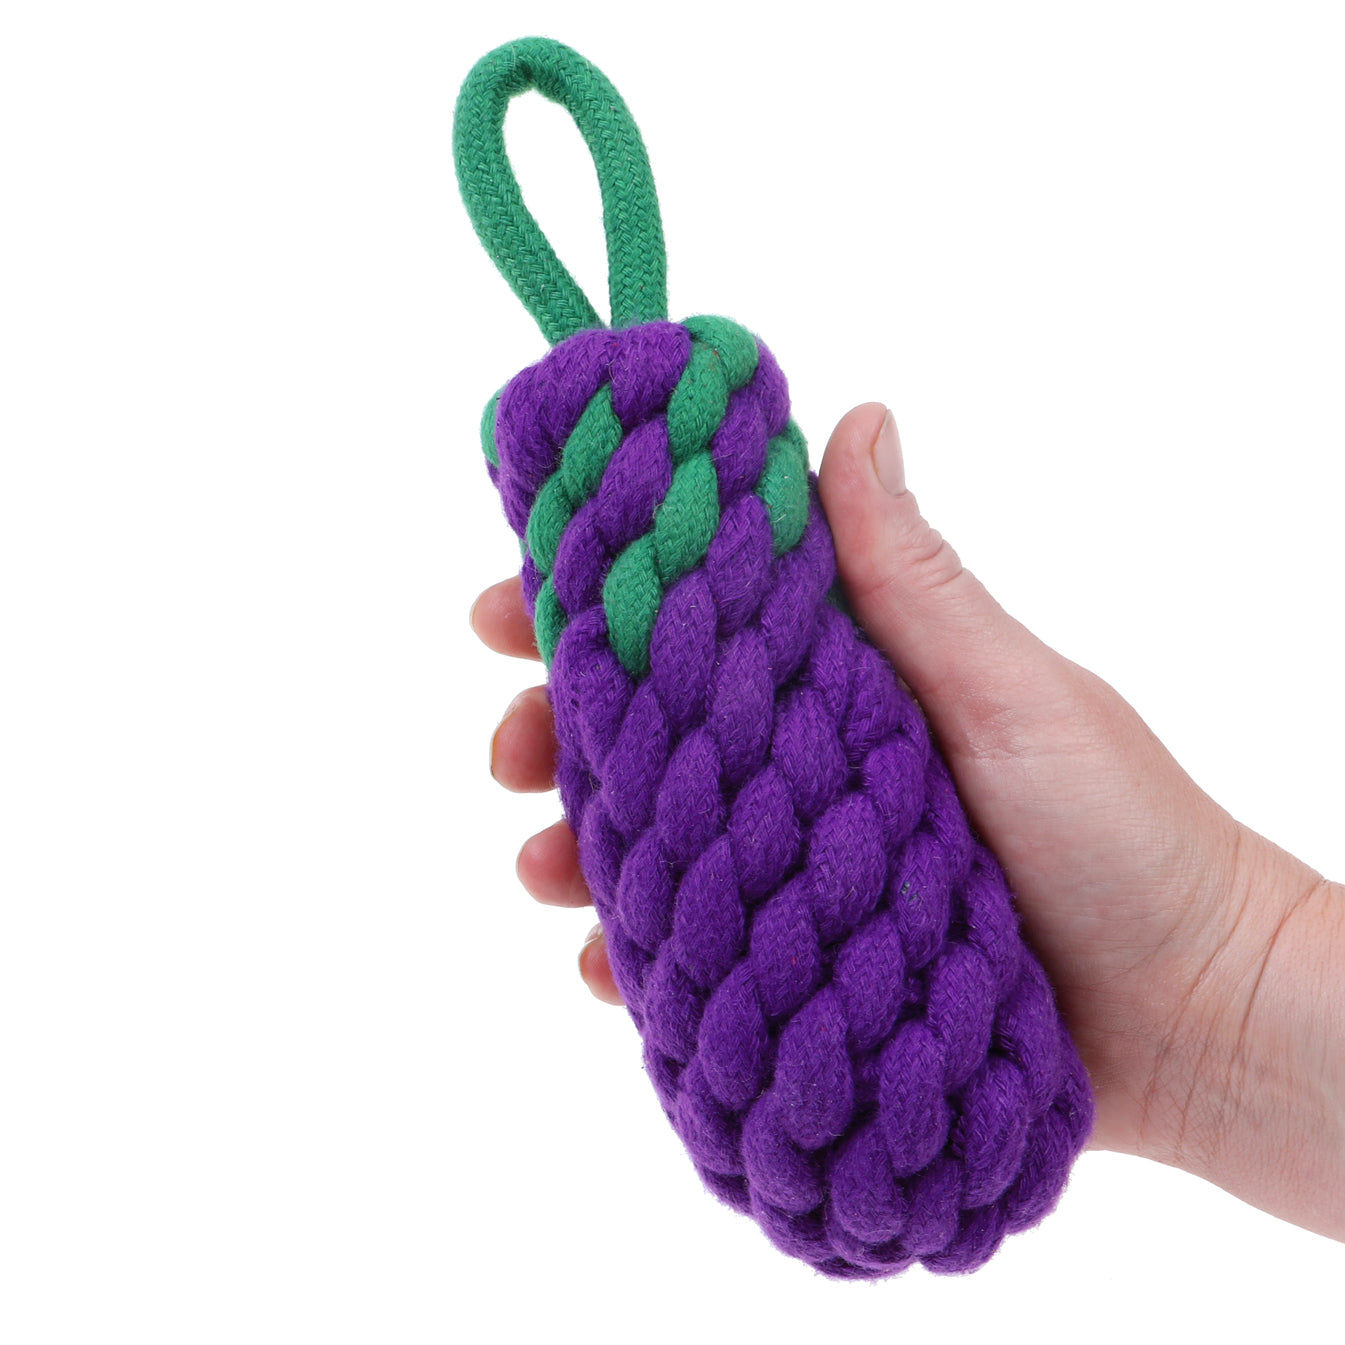 Country Tails Eggplant Rope Toy